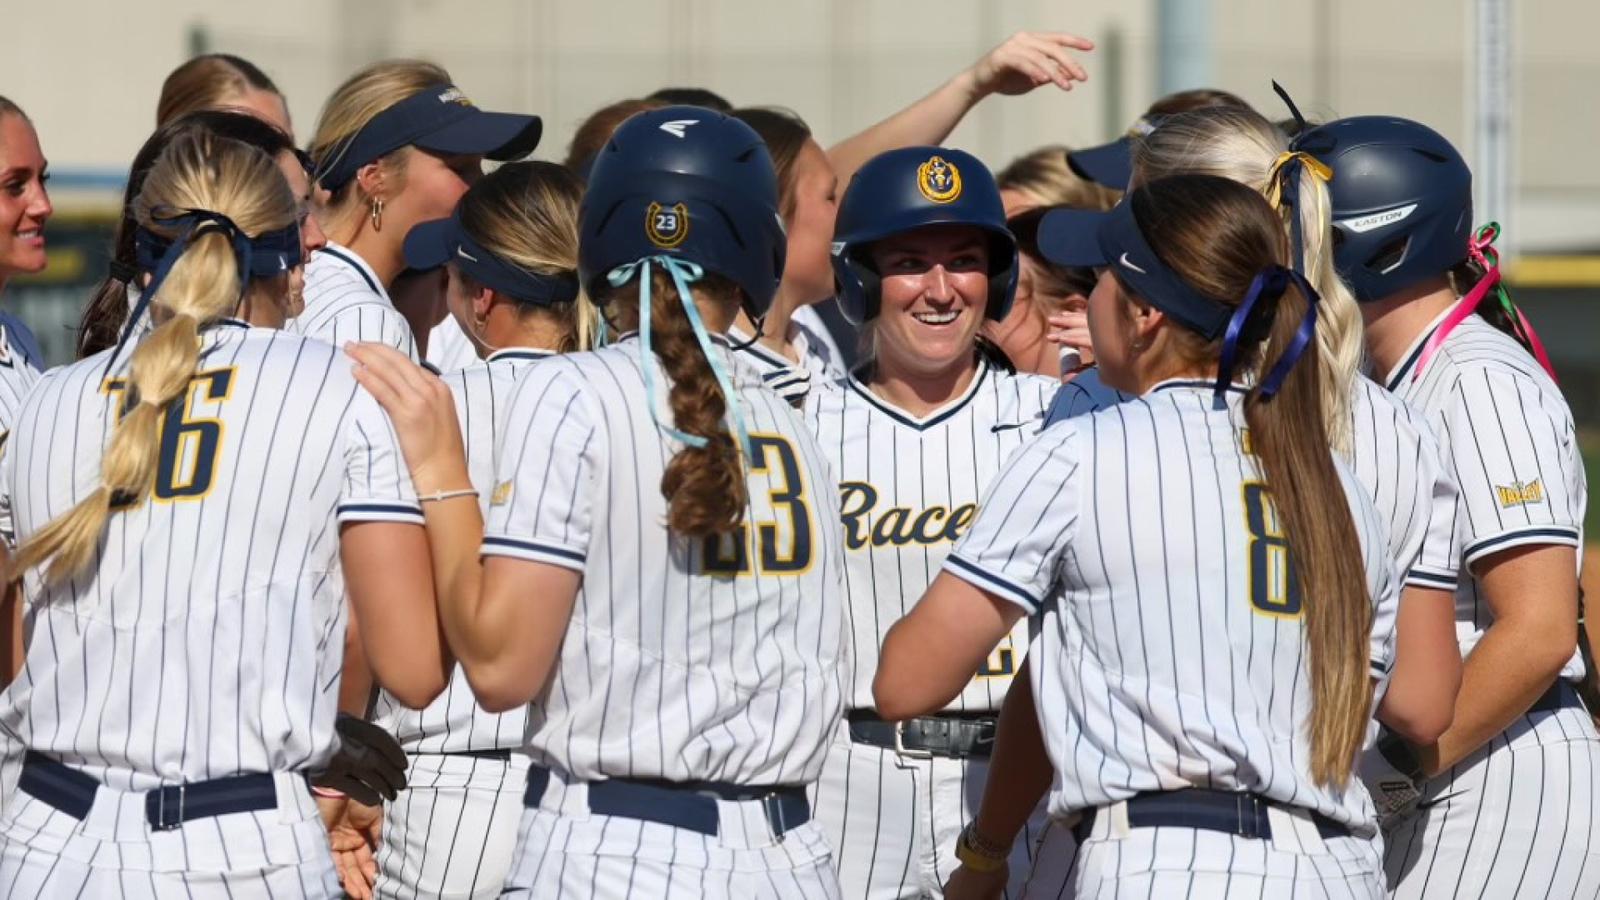 Murray State Softball Triumphs 6-3 over Southeast Missouri State in Midweek Battle